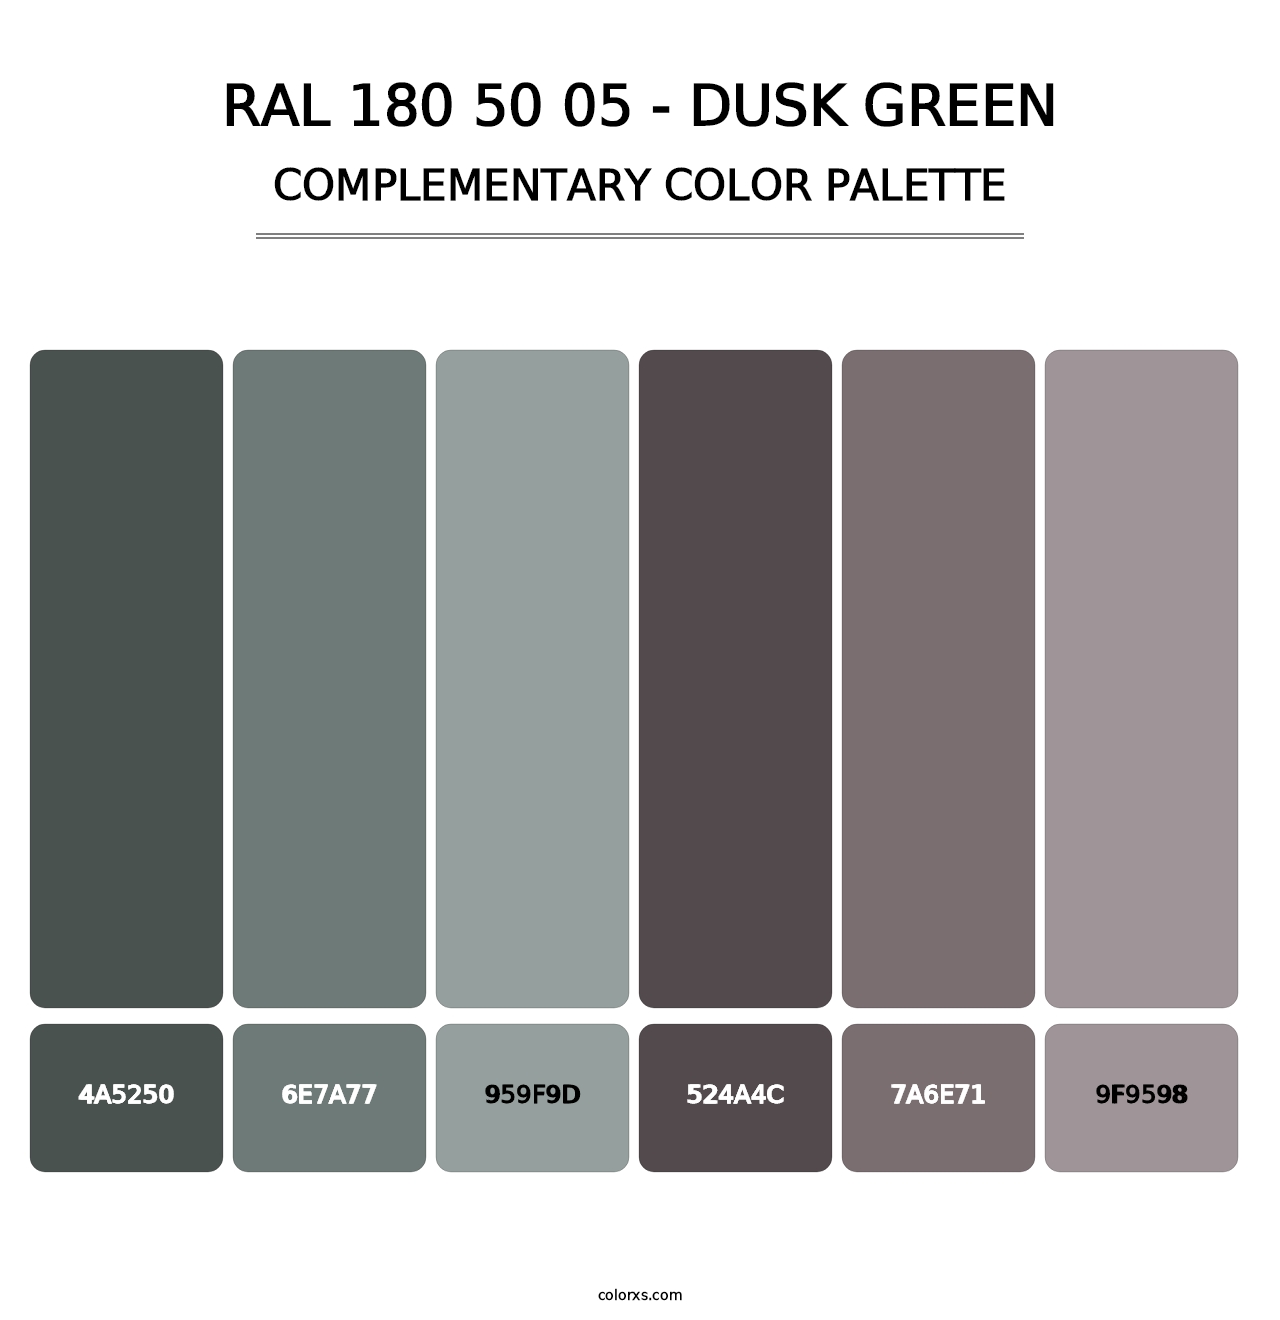 RAL 180 50 05 - Dusk Green - Complementary Color Palette